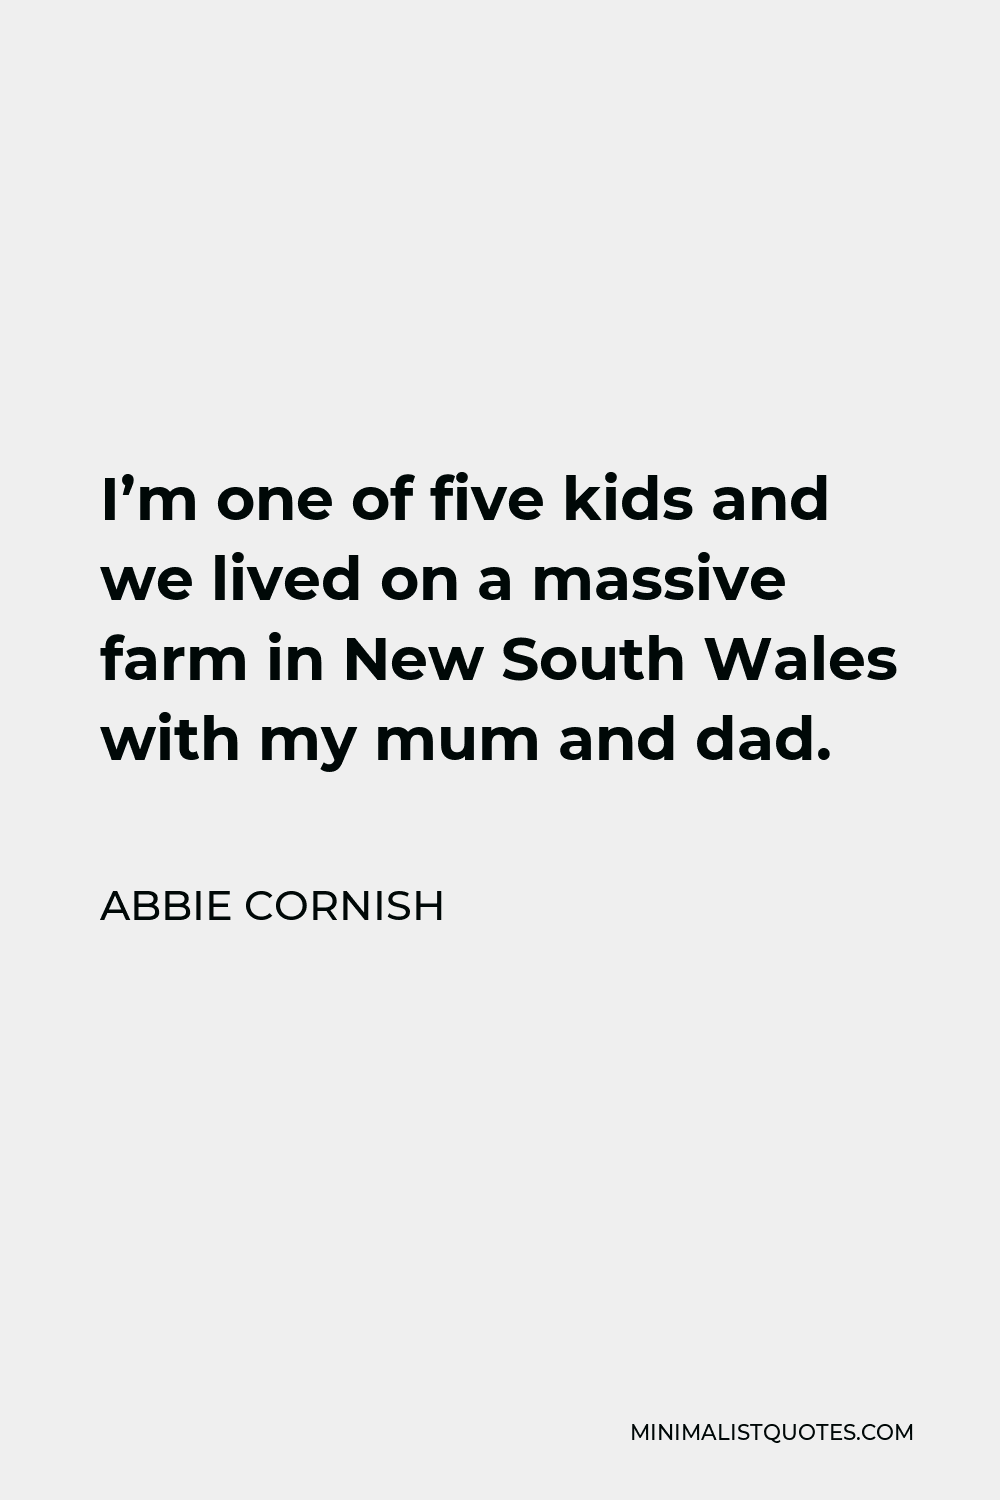 Abbie Cornish Quote - I’m one of five kids and we lived on a massive farm in New South Wales with my mum and dad.